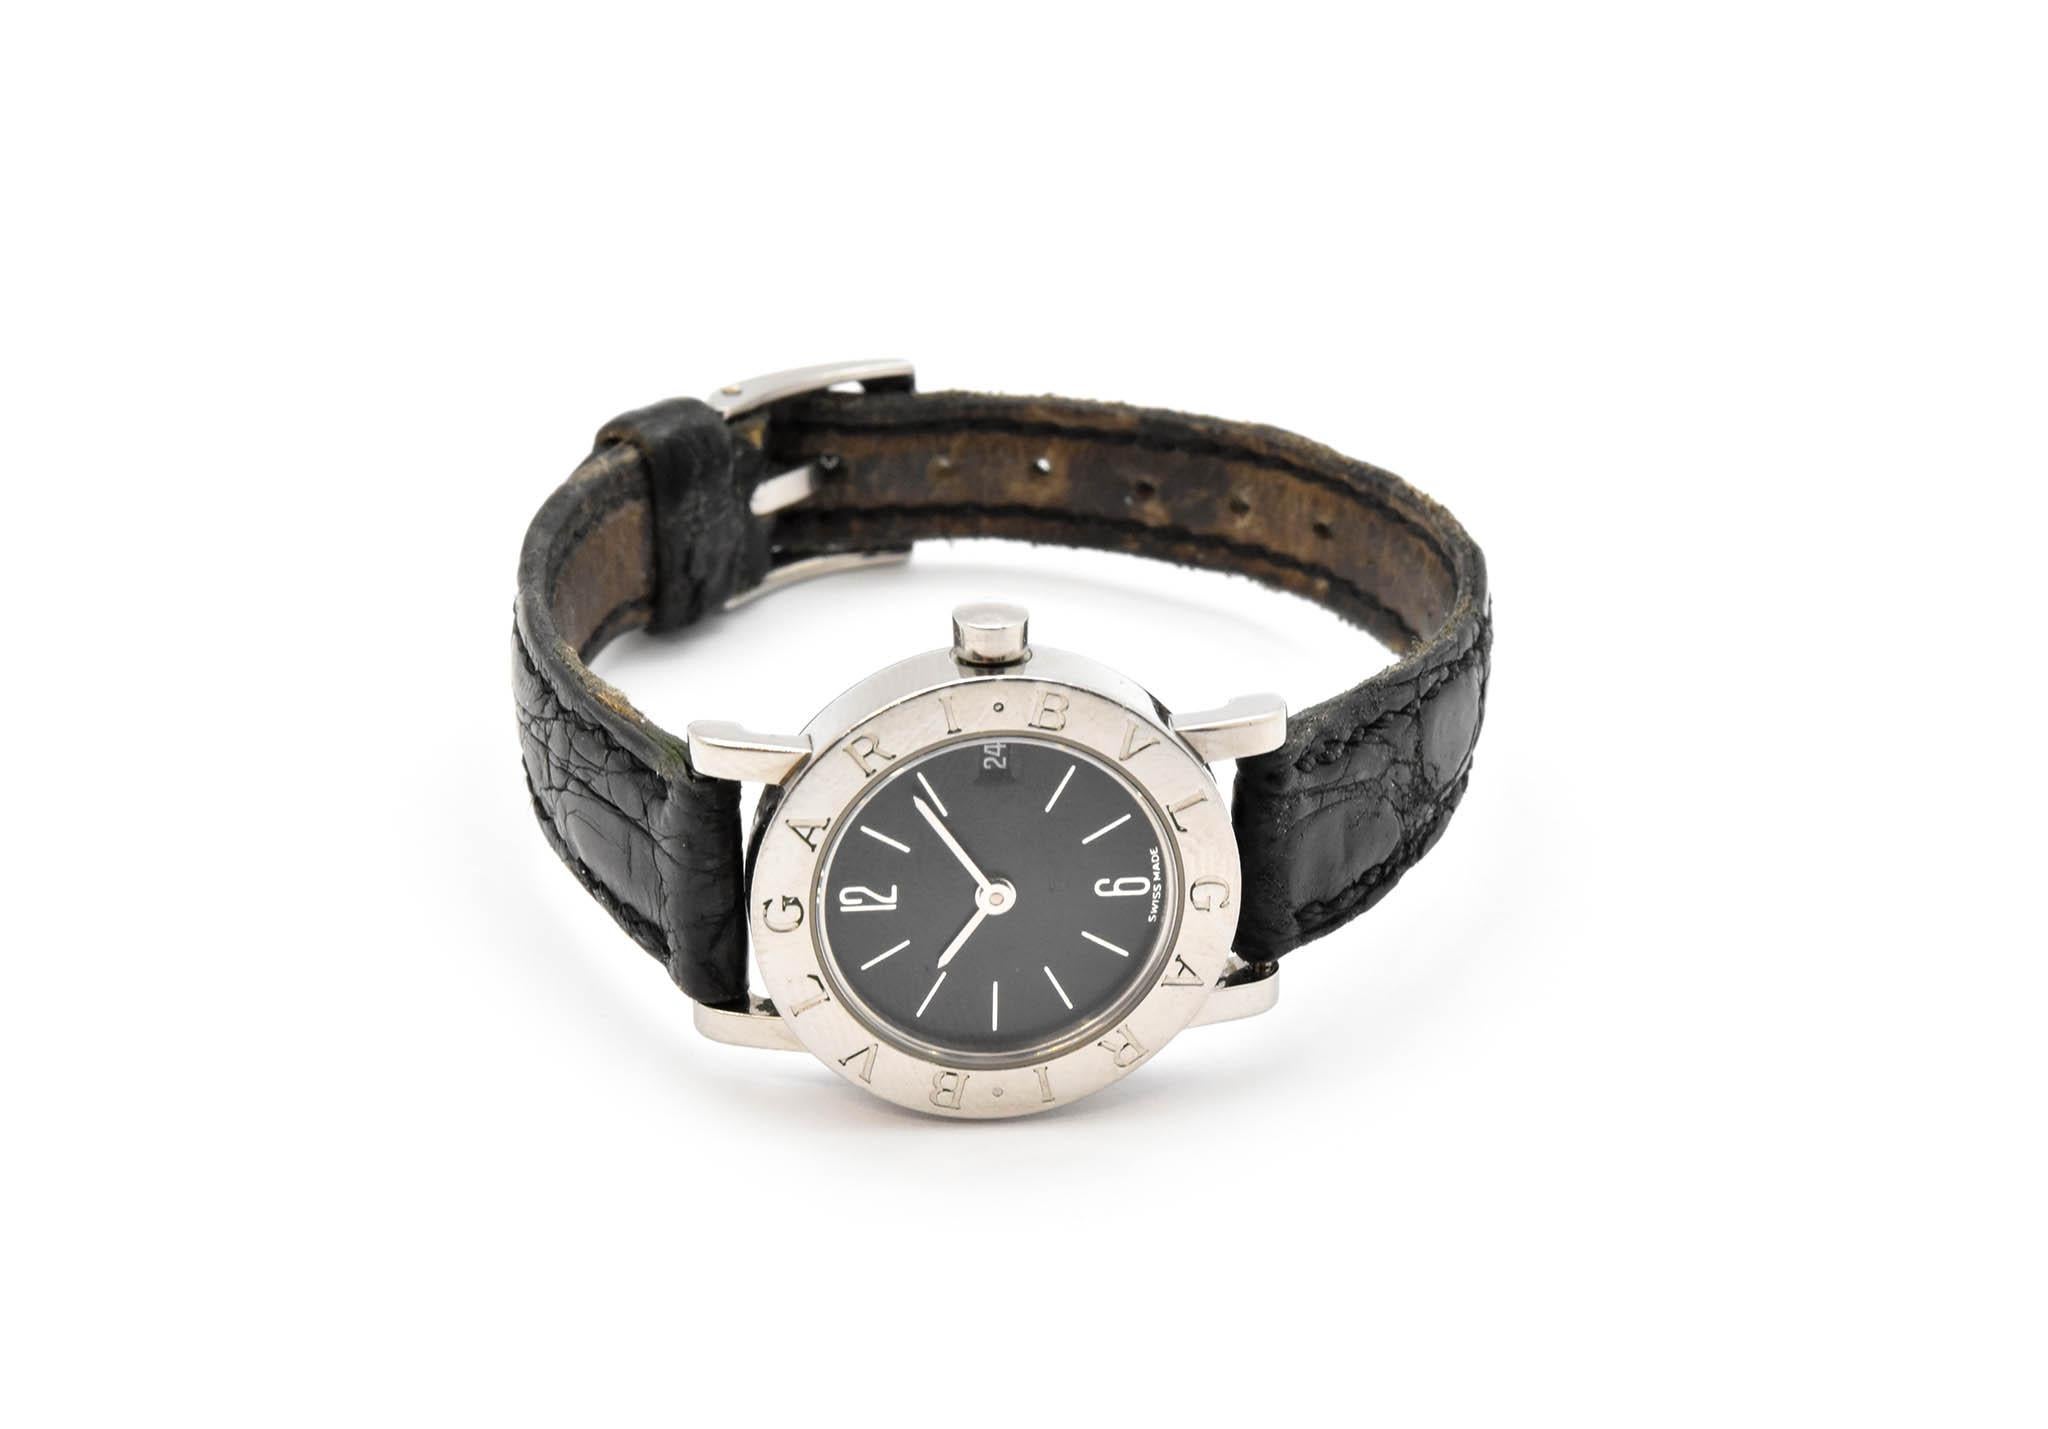 Movement: quartz
Function: hours, minutes
Case: 23mm stainless steel case, sapphire crystal
Band: *worn* original Bulgari black leather strap with steel Bulgari tang buckle, fits up to a 5.75-inch wrist
Dial: black dial, silver hands and hour